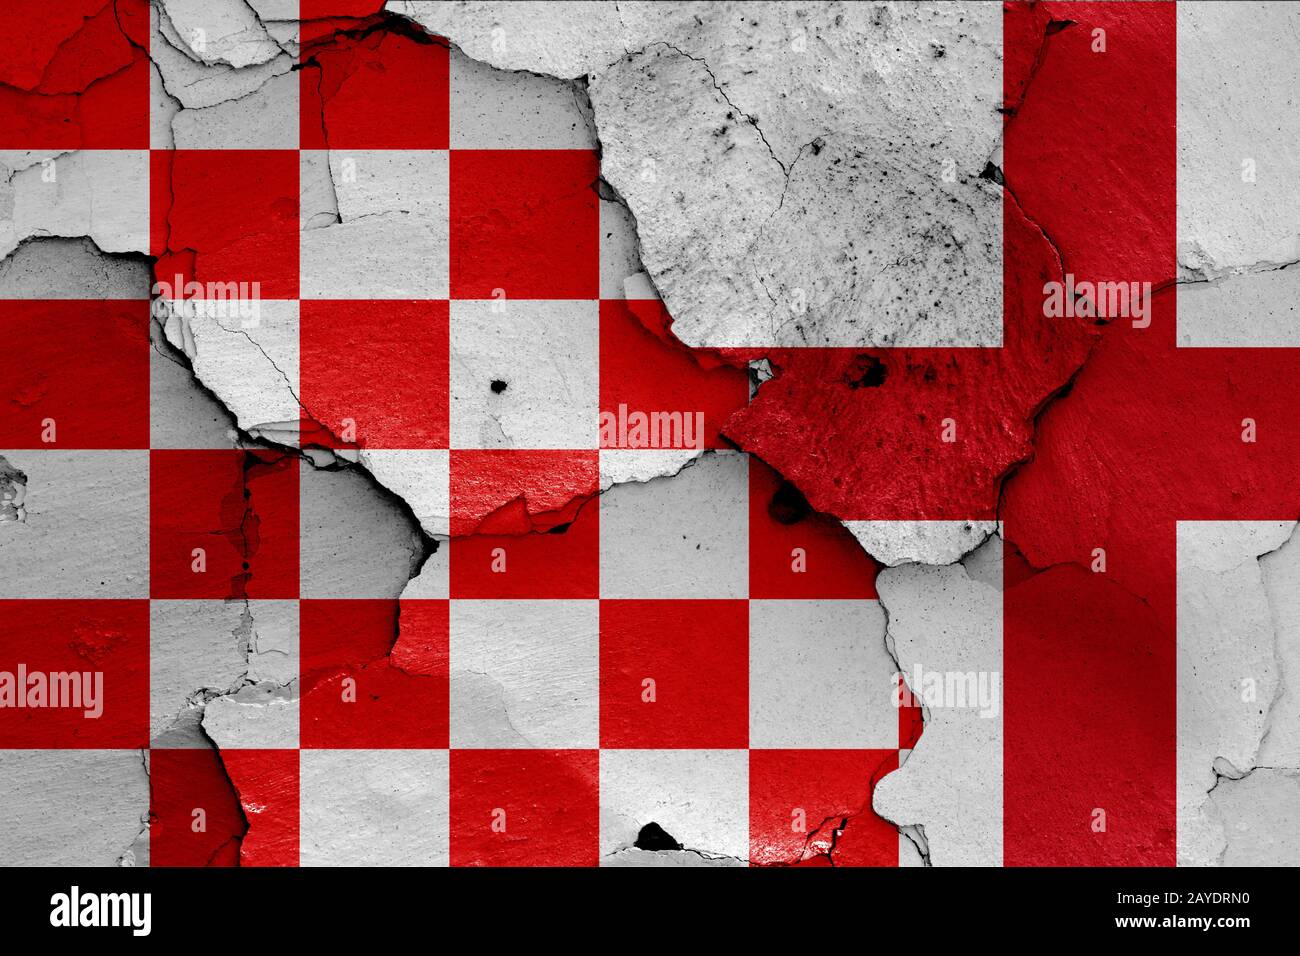 depiction of Croatian checkerboard flag and England flag Stock Photo